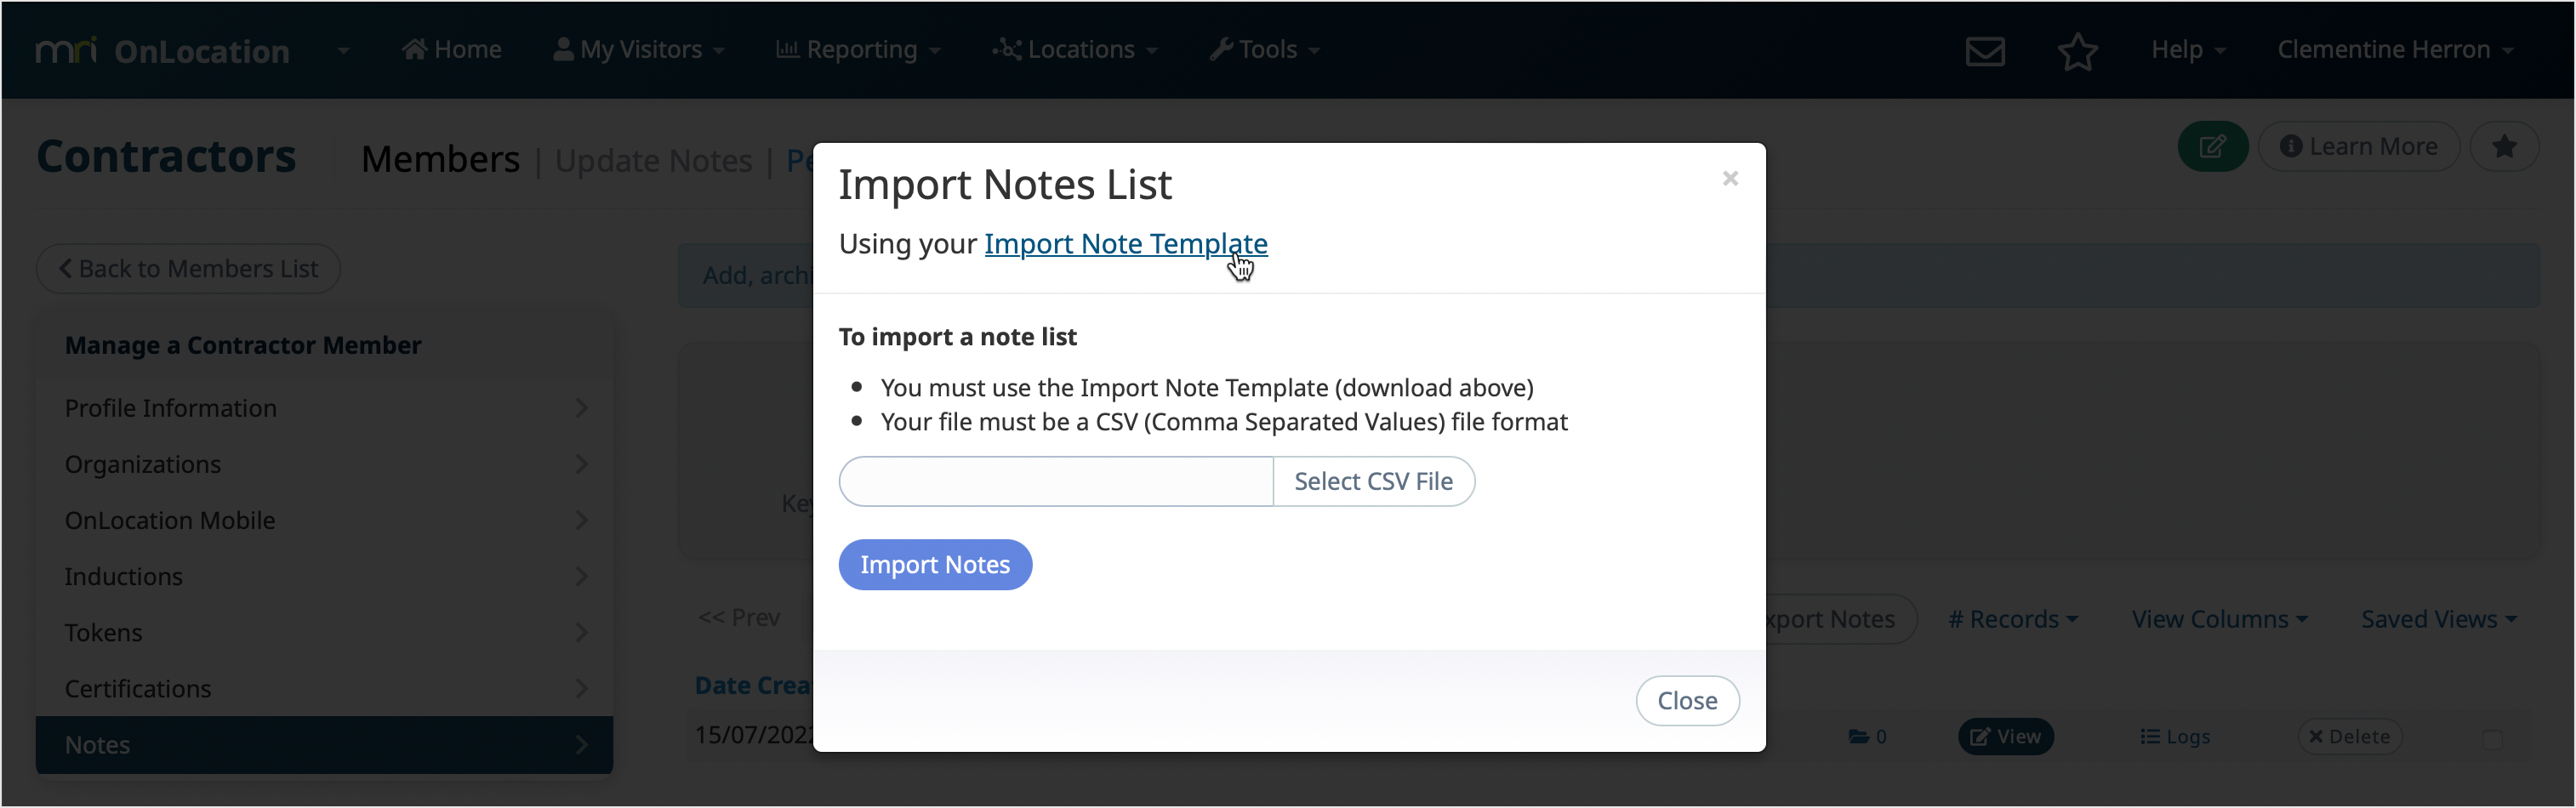 import-note-template.png